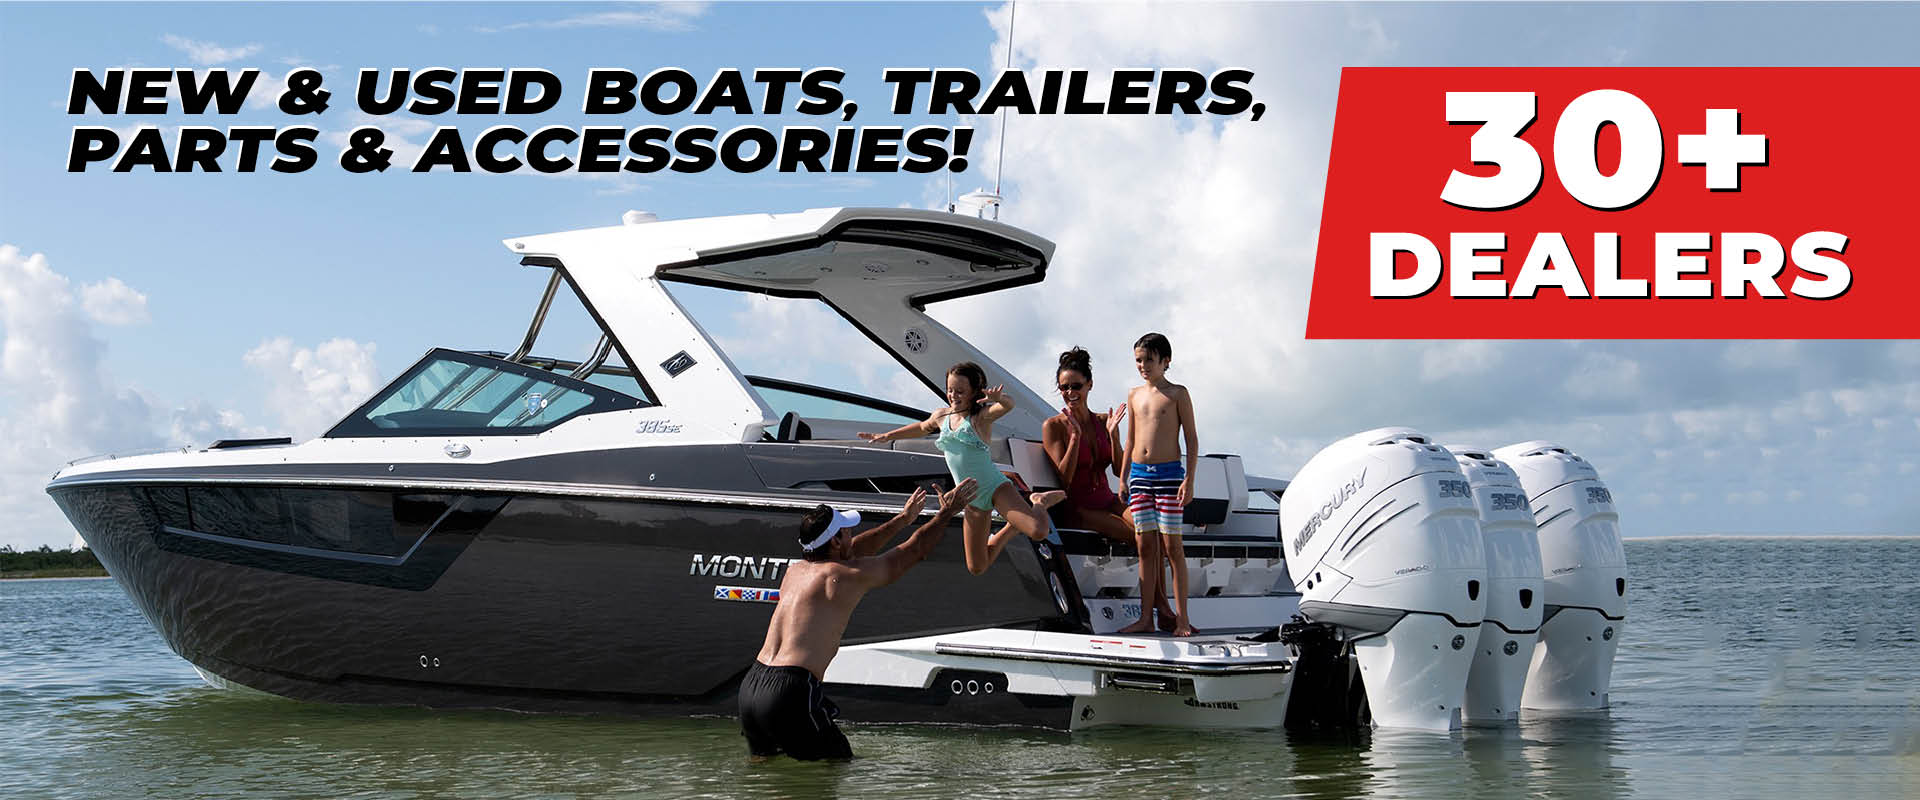 New and Used Boats, Trailers, Parts, and Accessories